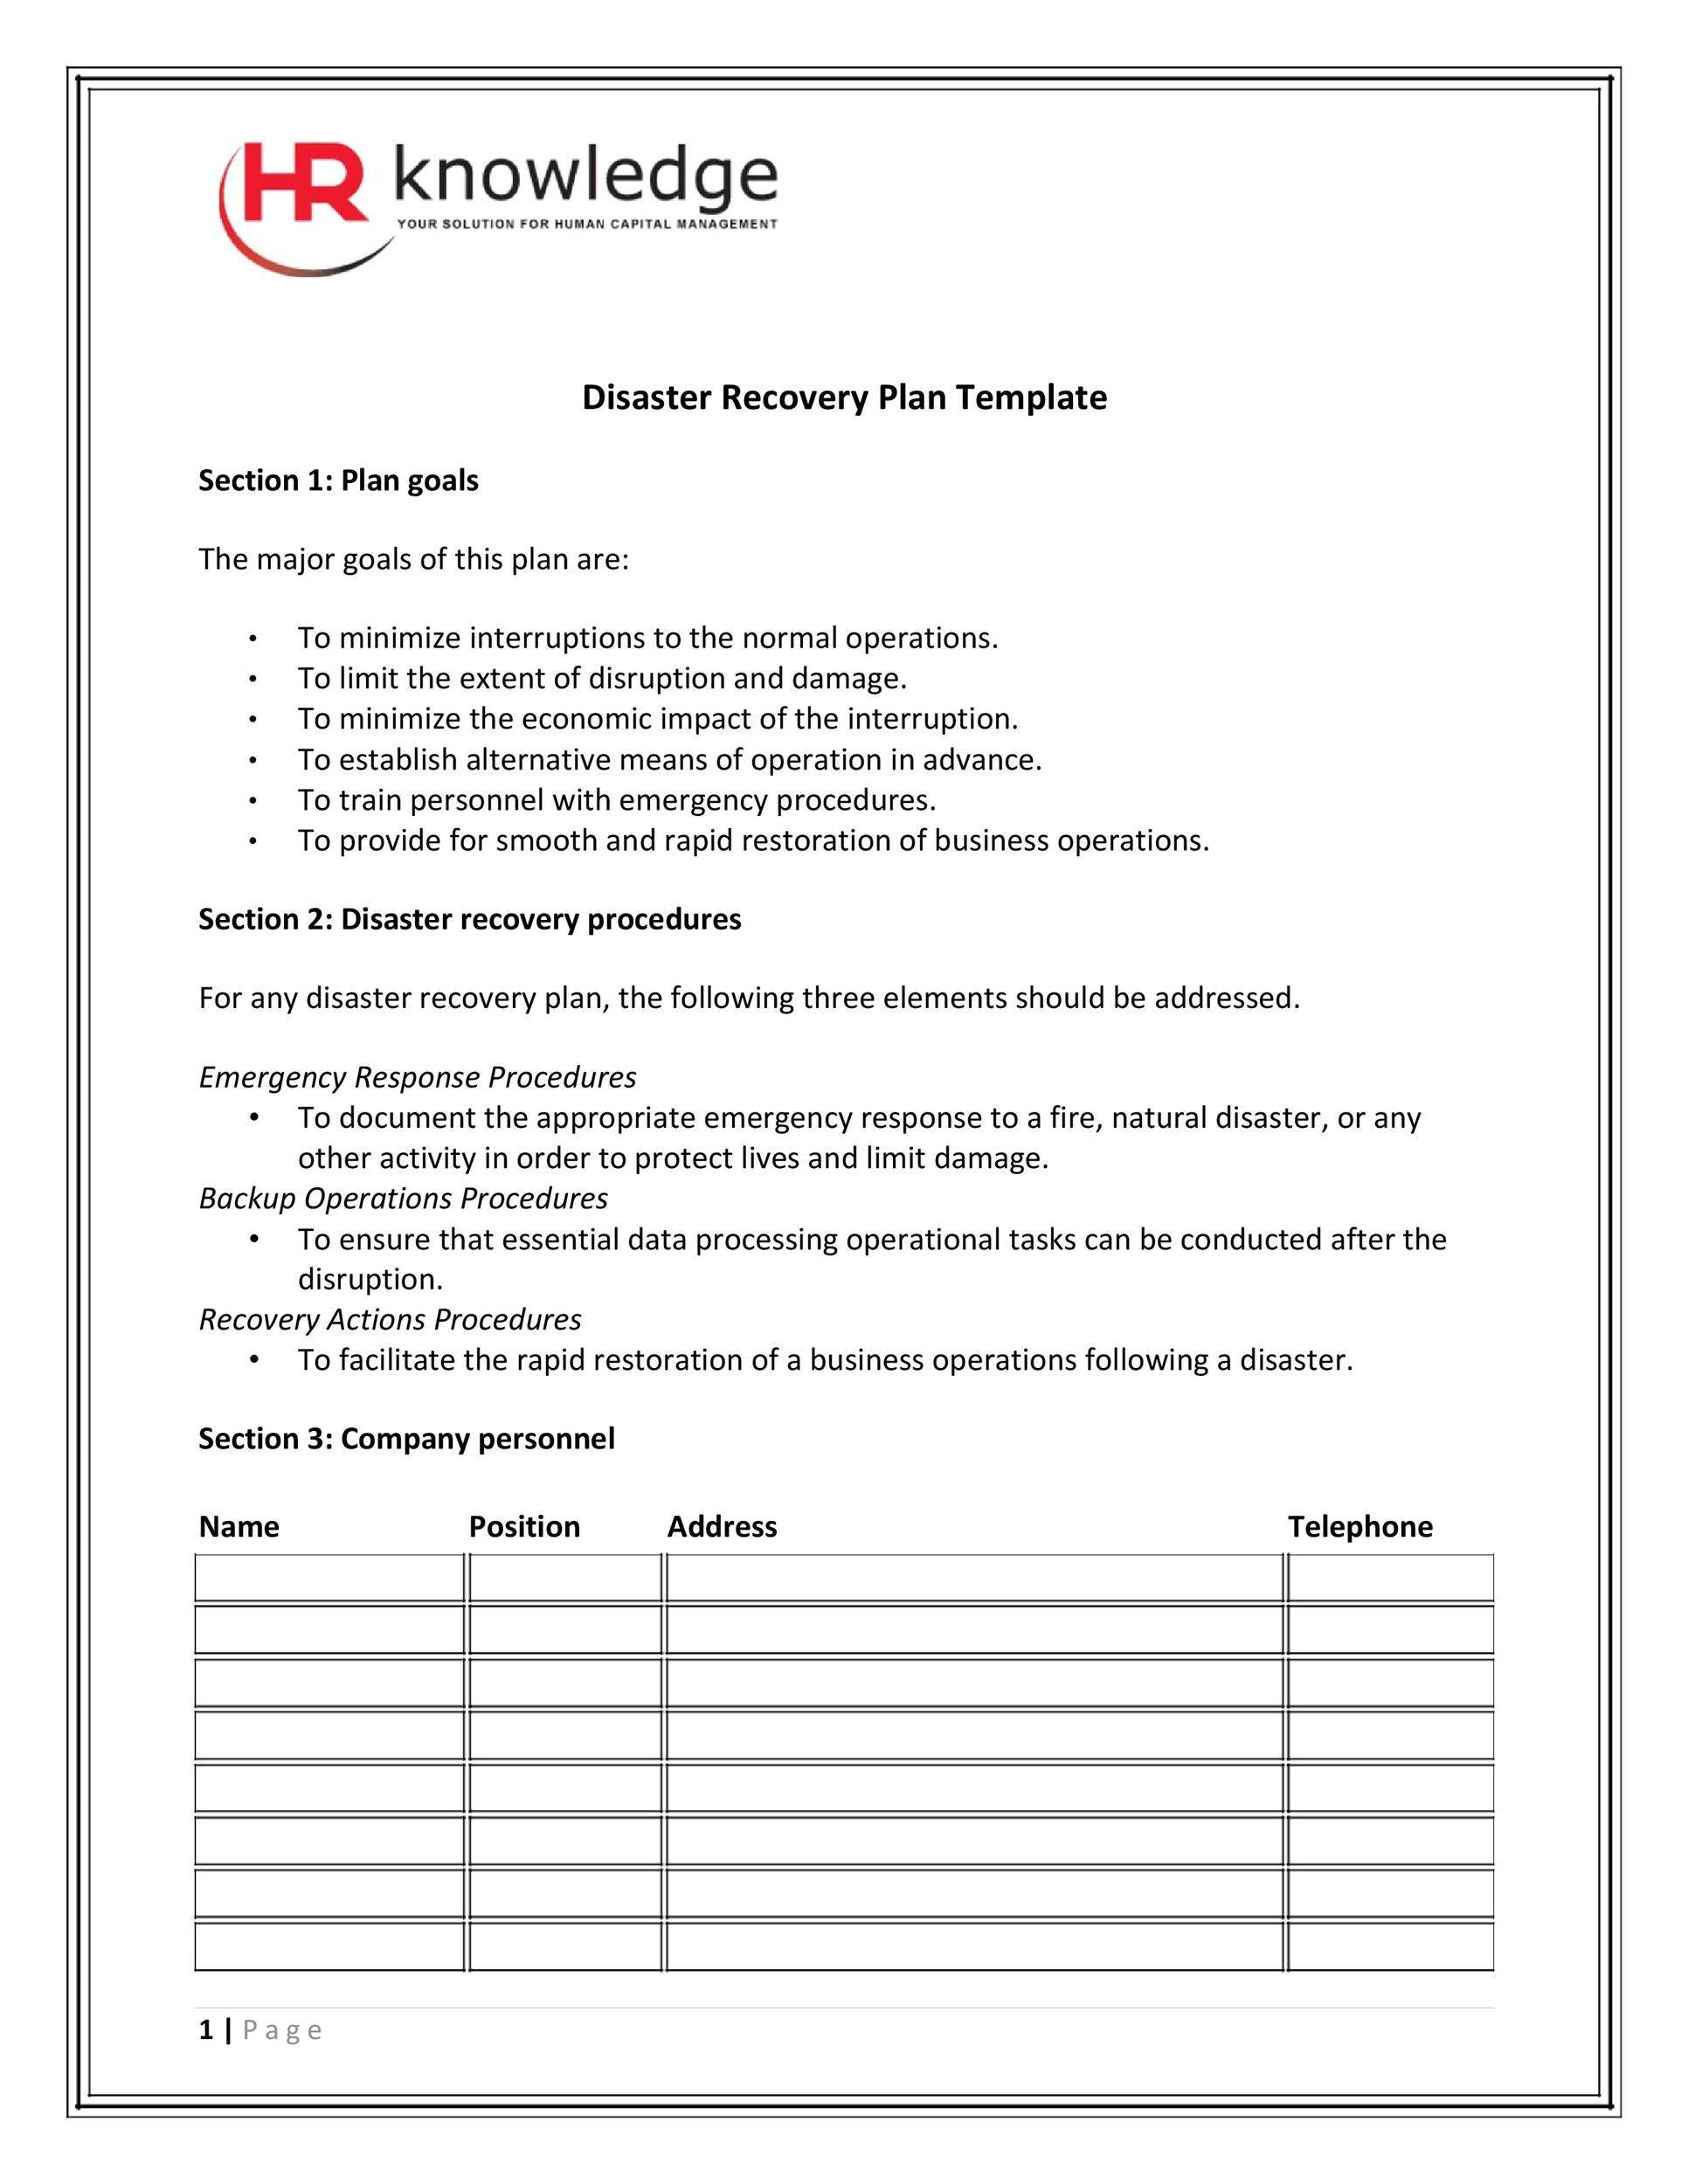 11 Effective Disaster Recovery Plan Templates [DRP] ᐅ TemplateLab For Disaster Recovery Plan Checklist Template Throughout Disaster Recovery Plan Checklist Template